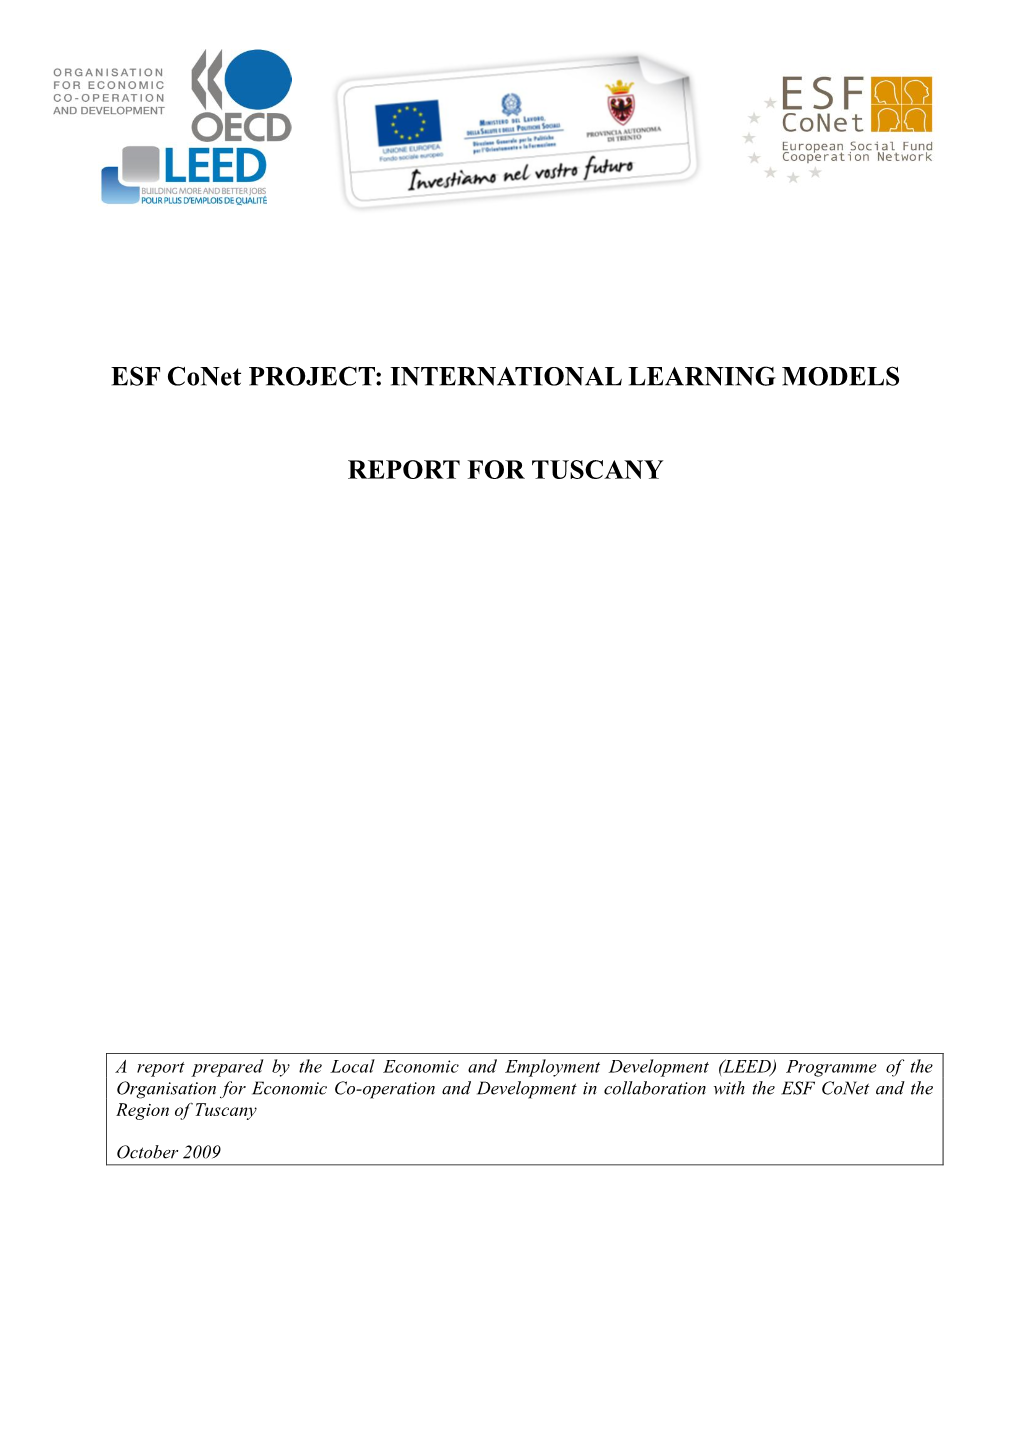 ESF Conet PROJECT: INTERNATIONAL LEARNING MODELS